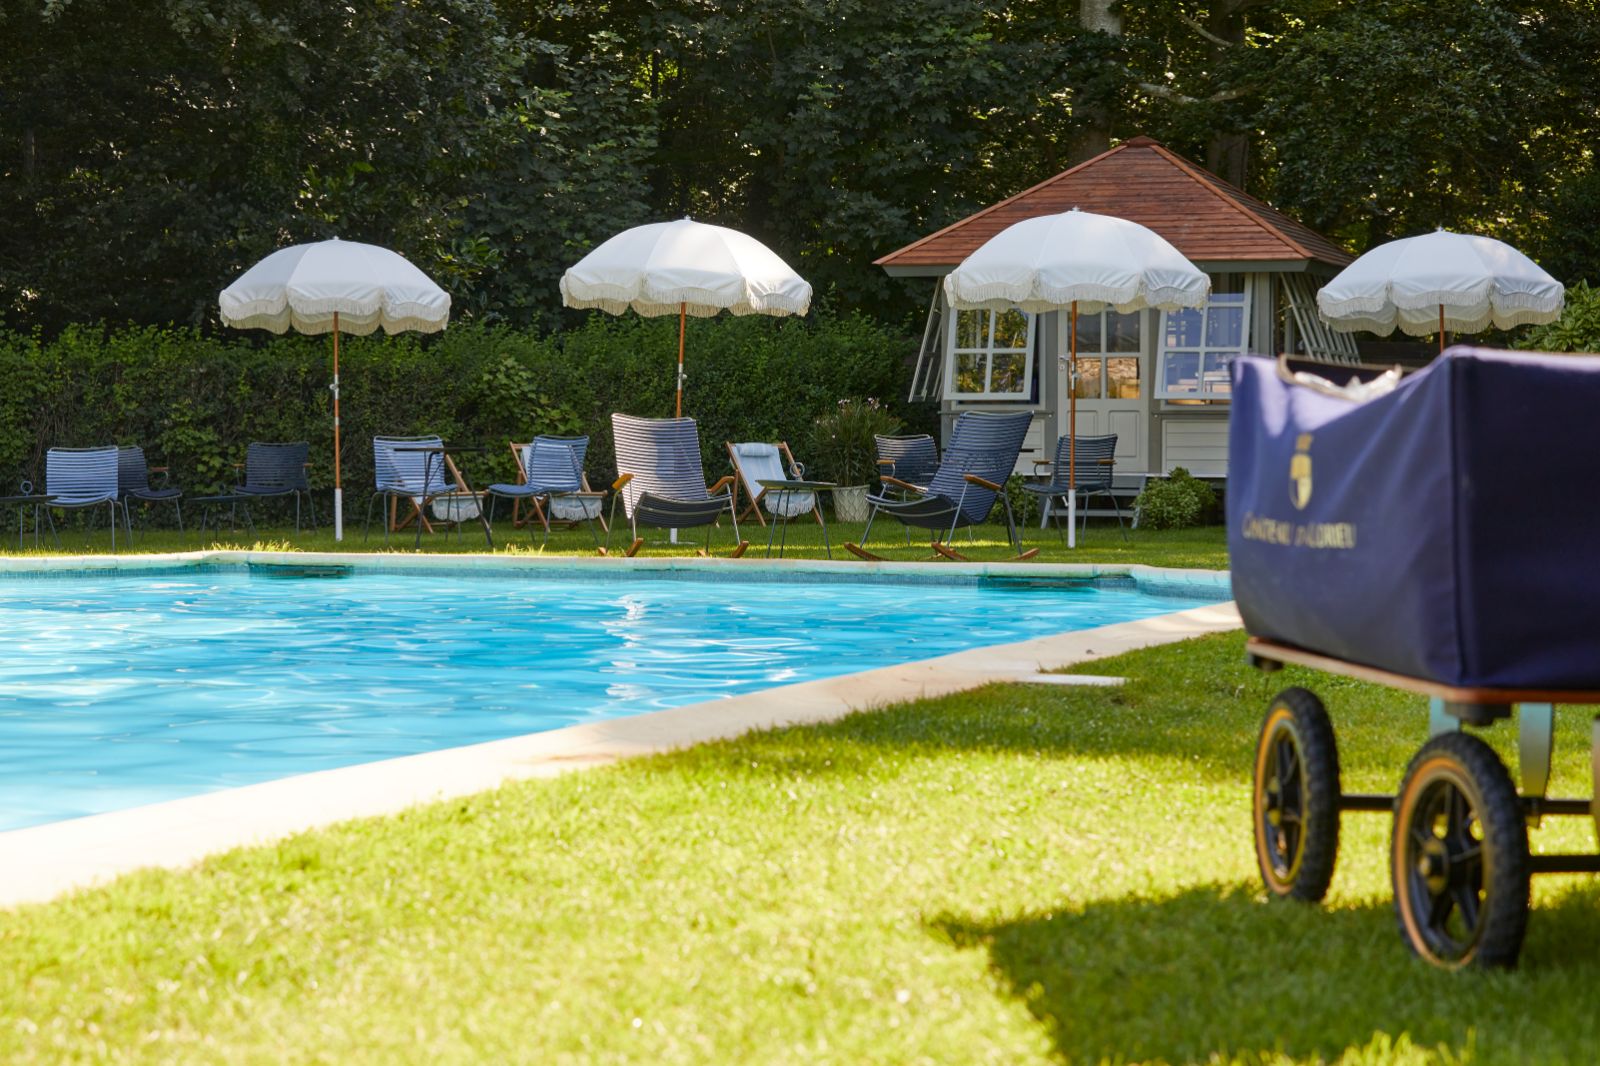 Poolside and sunbeds at Chateau d'Audrieu in the Normandy region of France